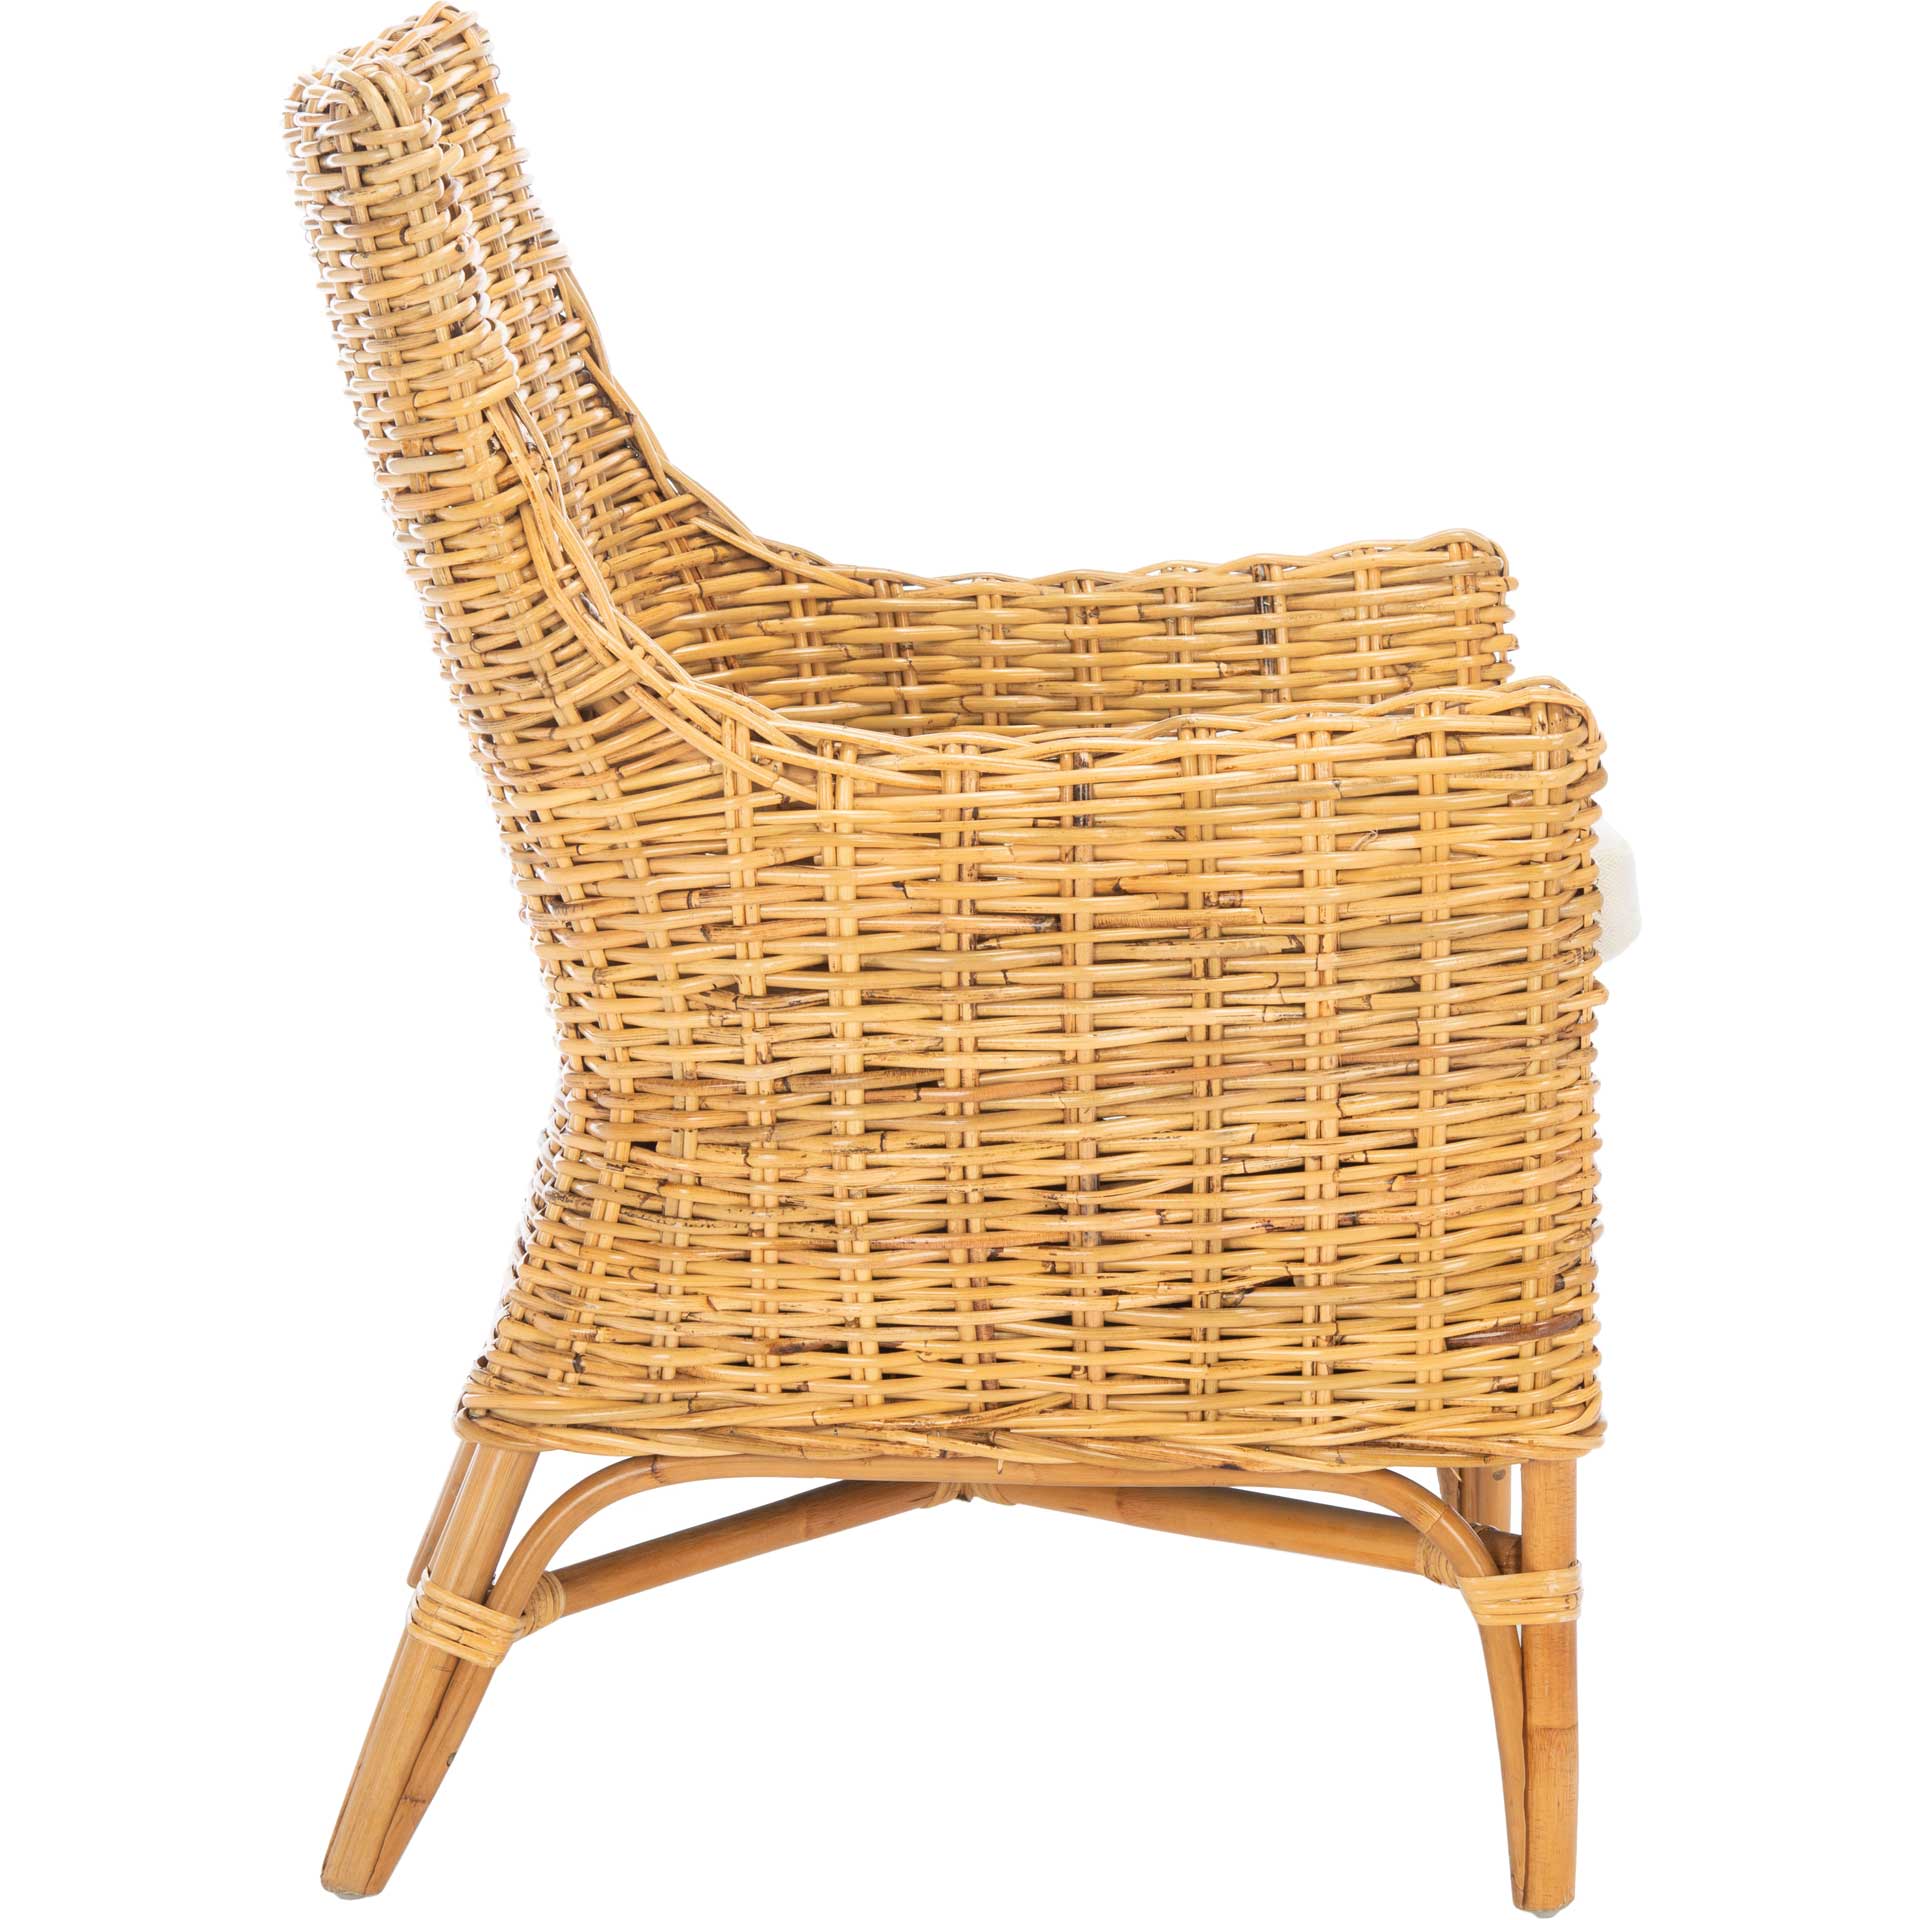 Crispin Rattan Accent Chair Natural/White